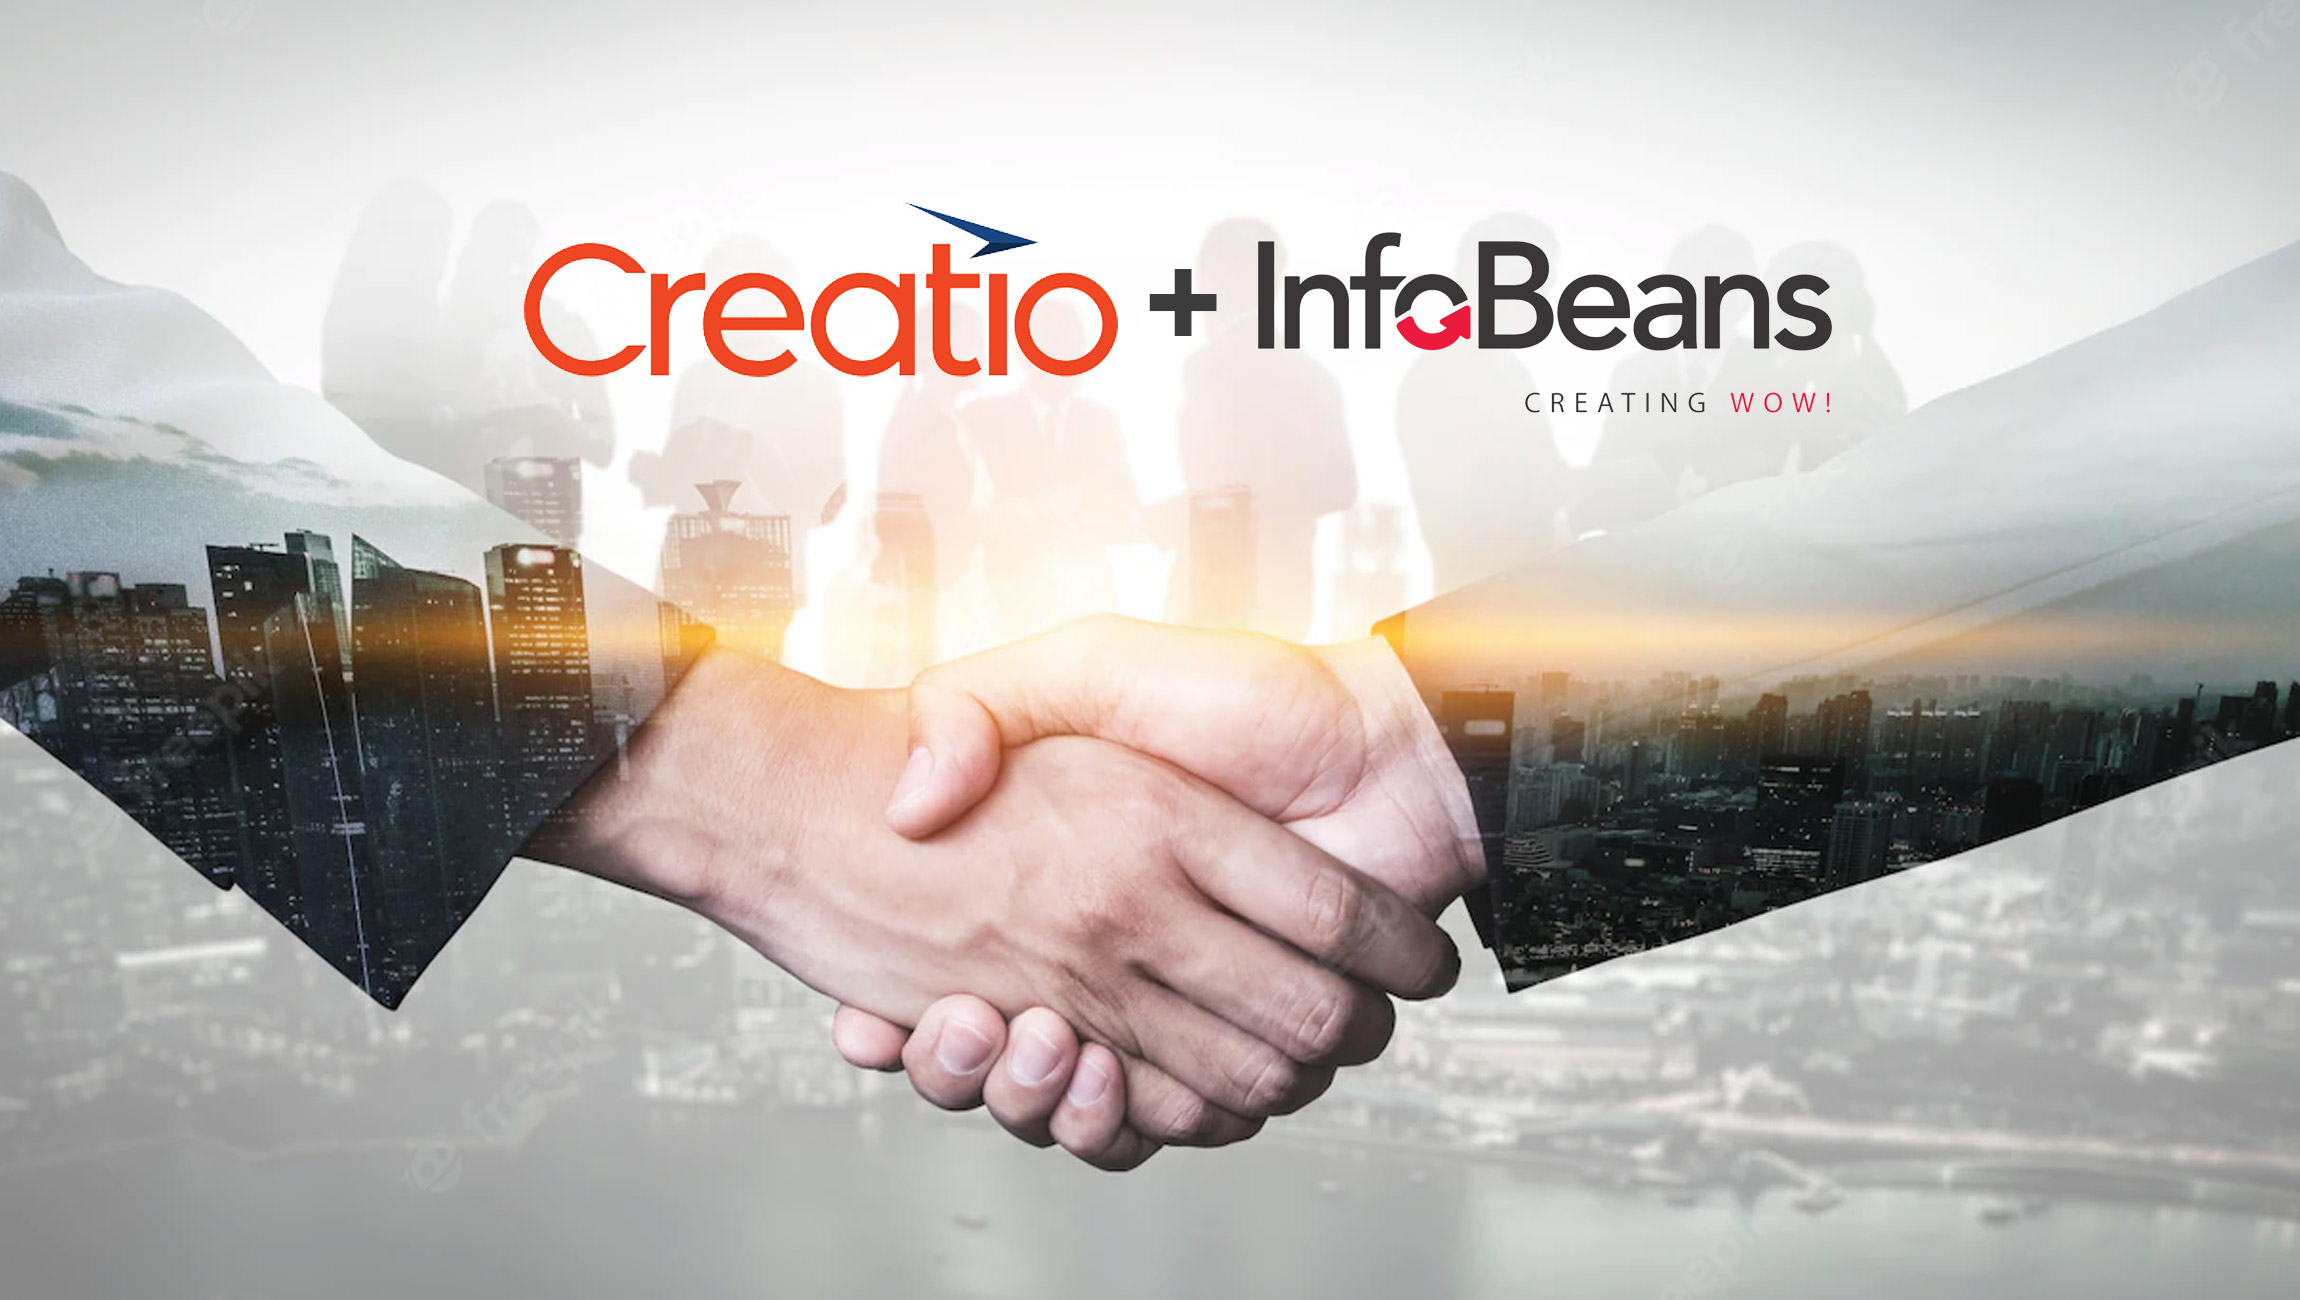 Creatio Partners with InfoBeans Inc. to Further Evangelize No-code Worldwide